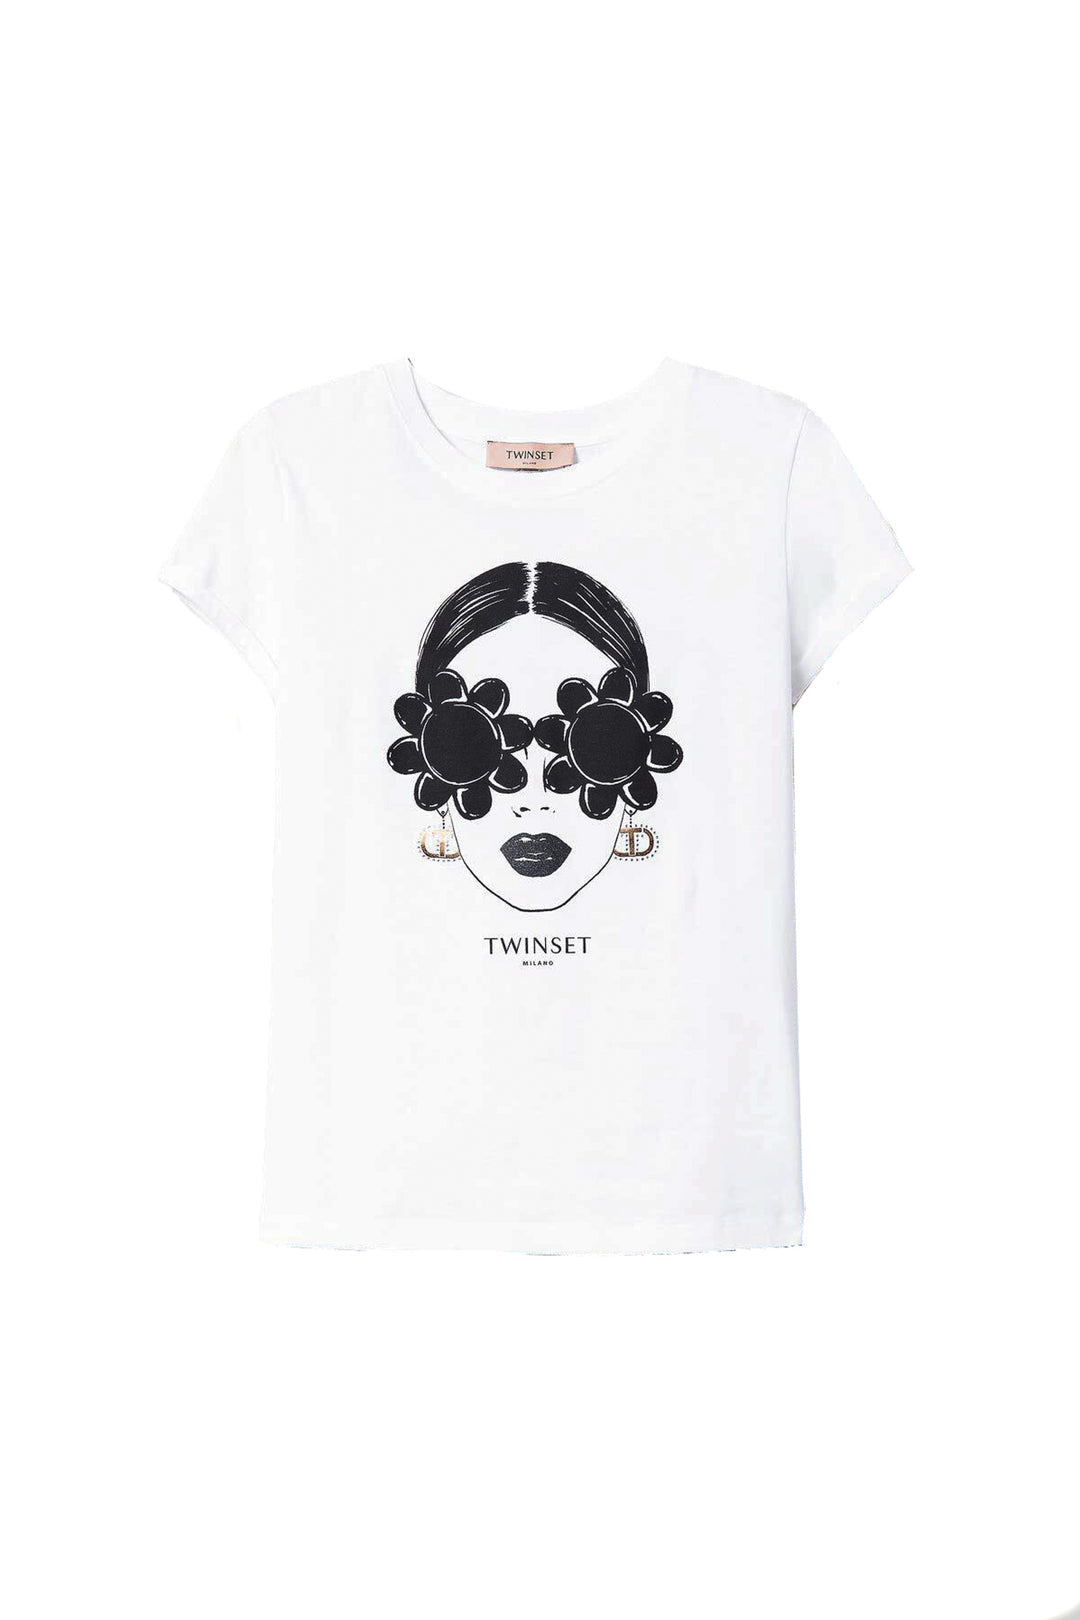 TWINSET T-shirt bianca con stampa volto - Mancinelli 1954